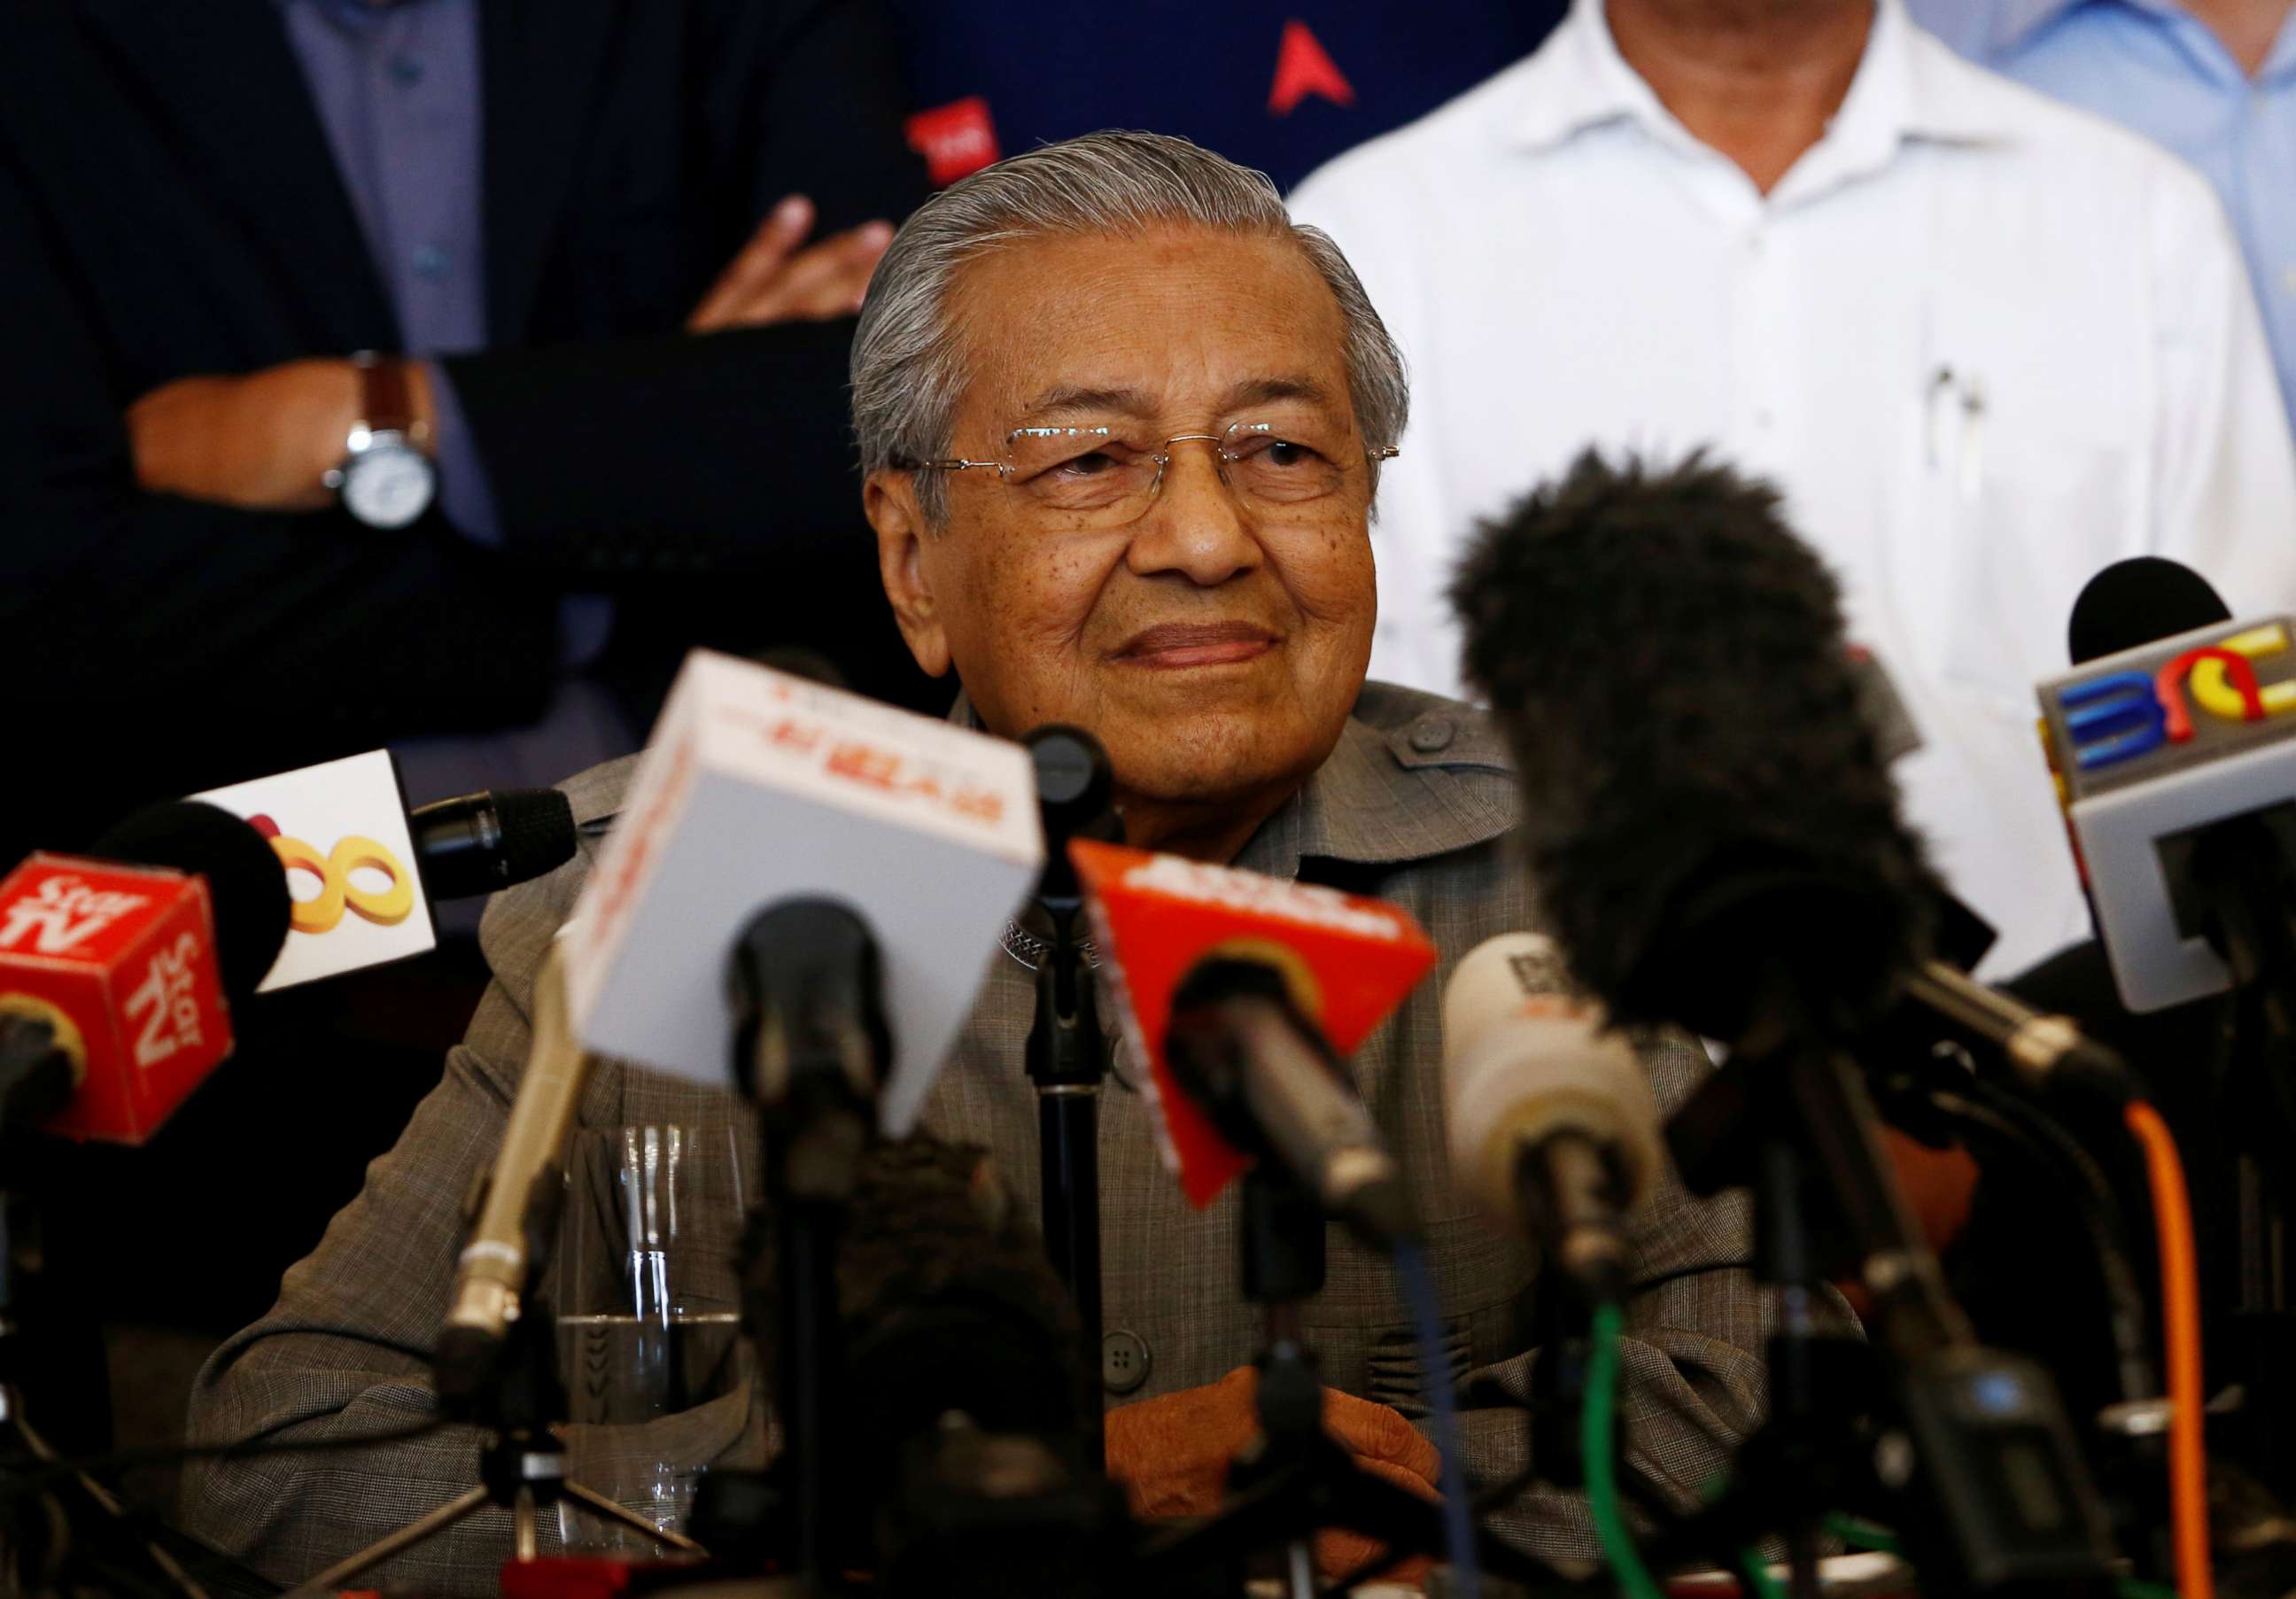 PHOTO: The winning opposition candidate Mahathir Mohamed speaks at a press conference in Kuala Lumpur on May 10, 2018. The former prime minister will be sworn in to office again after his stunning election win. 